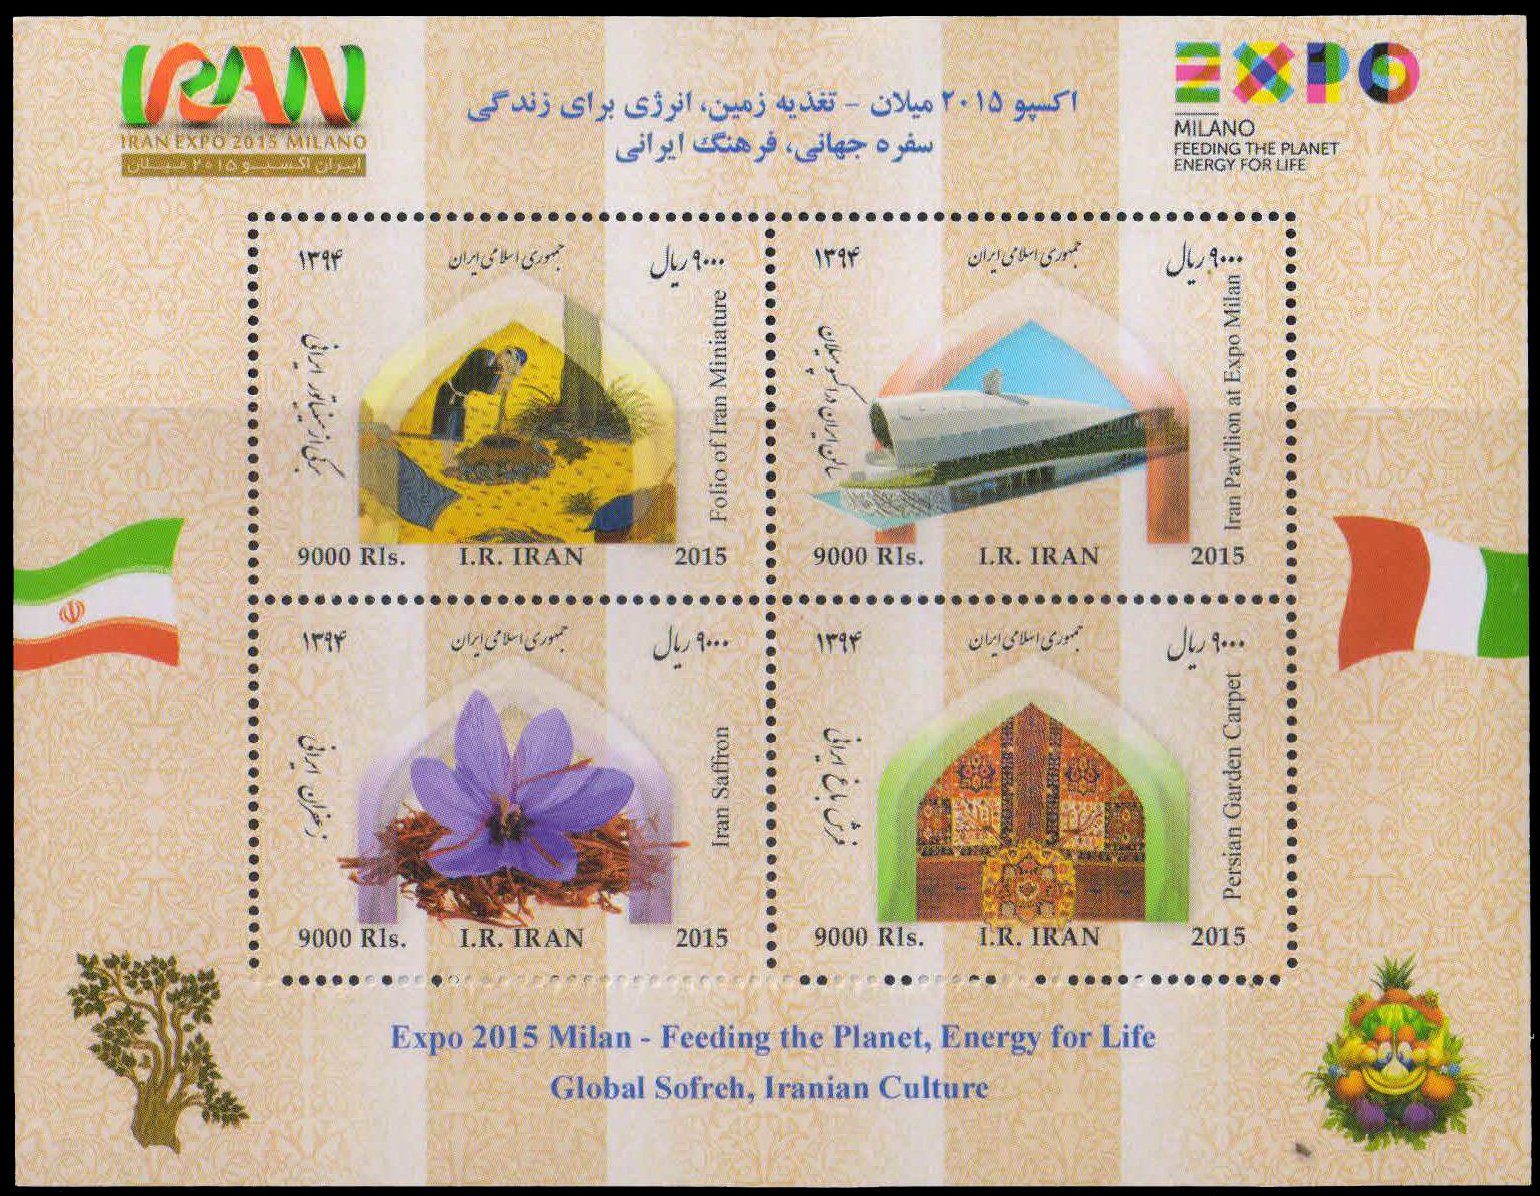 IRAN 2015-Iran Expo 2015 Miland-Feeding the Planet, Energy for Life Global Sofreh, Iranian Culture, Sheet of 4, MNH, Cat £ 48-